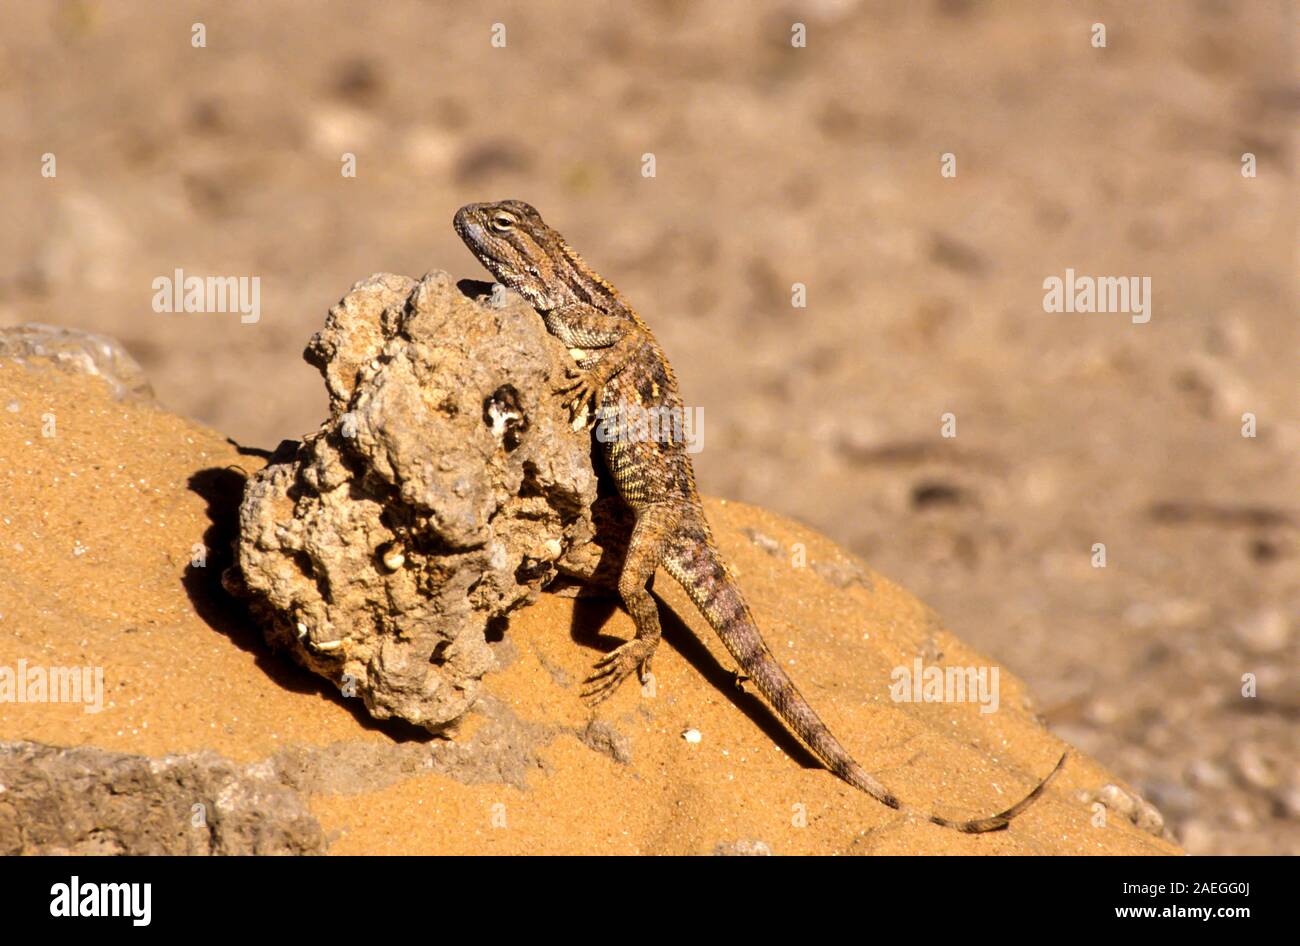 Savigny's agama (Trapelus savignii) is a species of lizard in the family Agamidae. It is found in Egypt, Israel, and the Palestinian territories. Phot Stock Photo